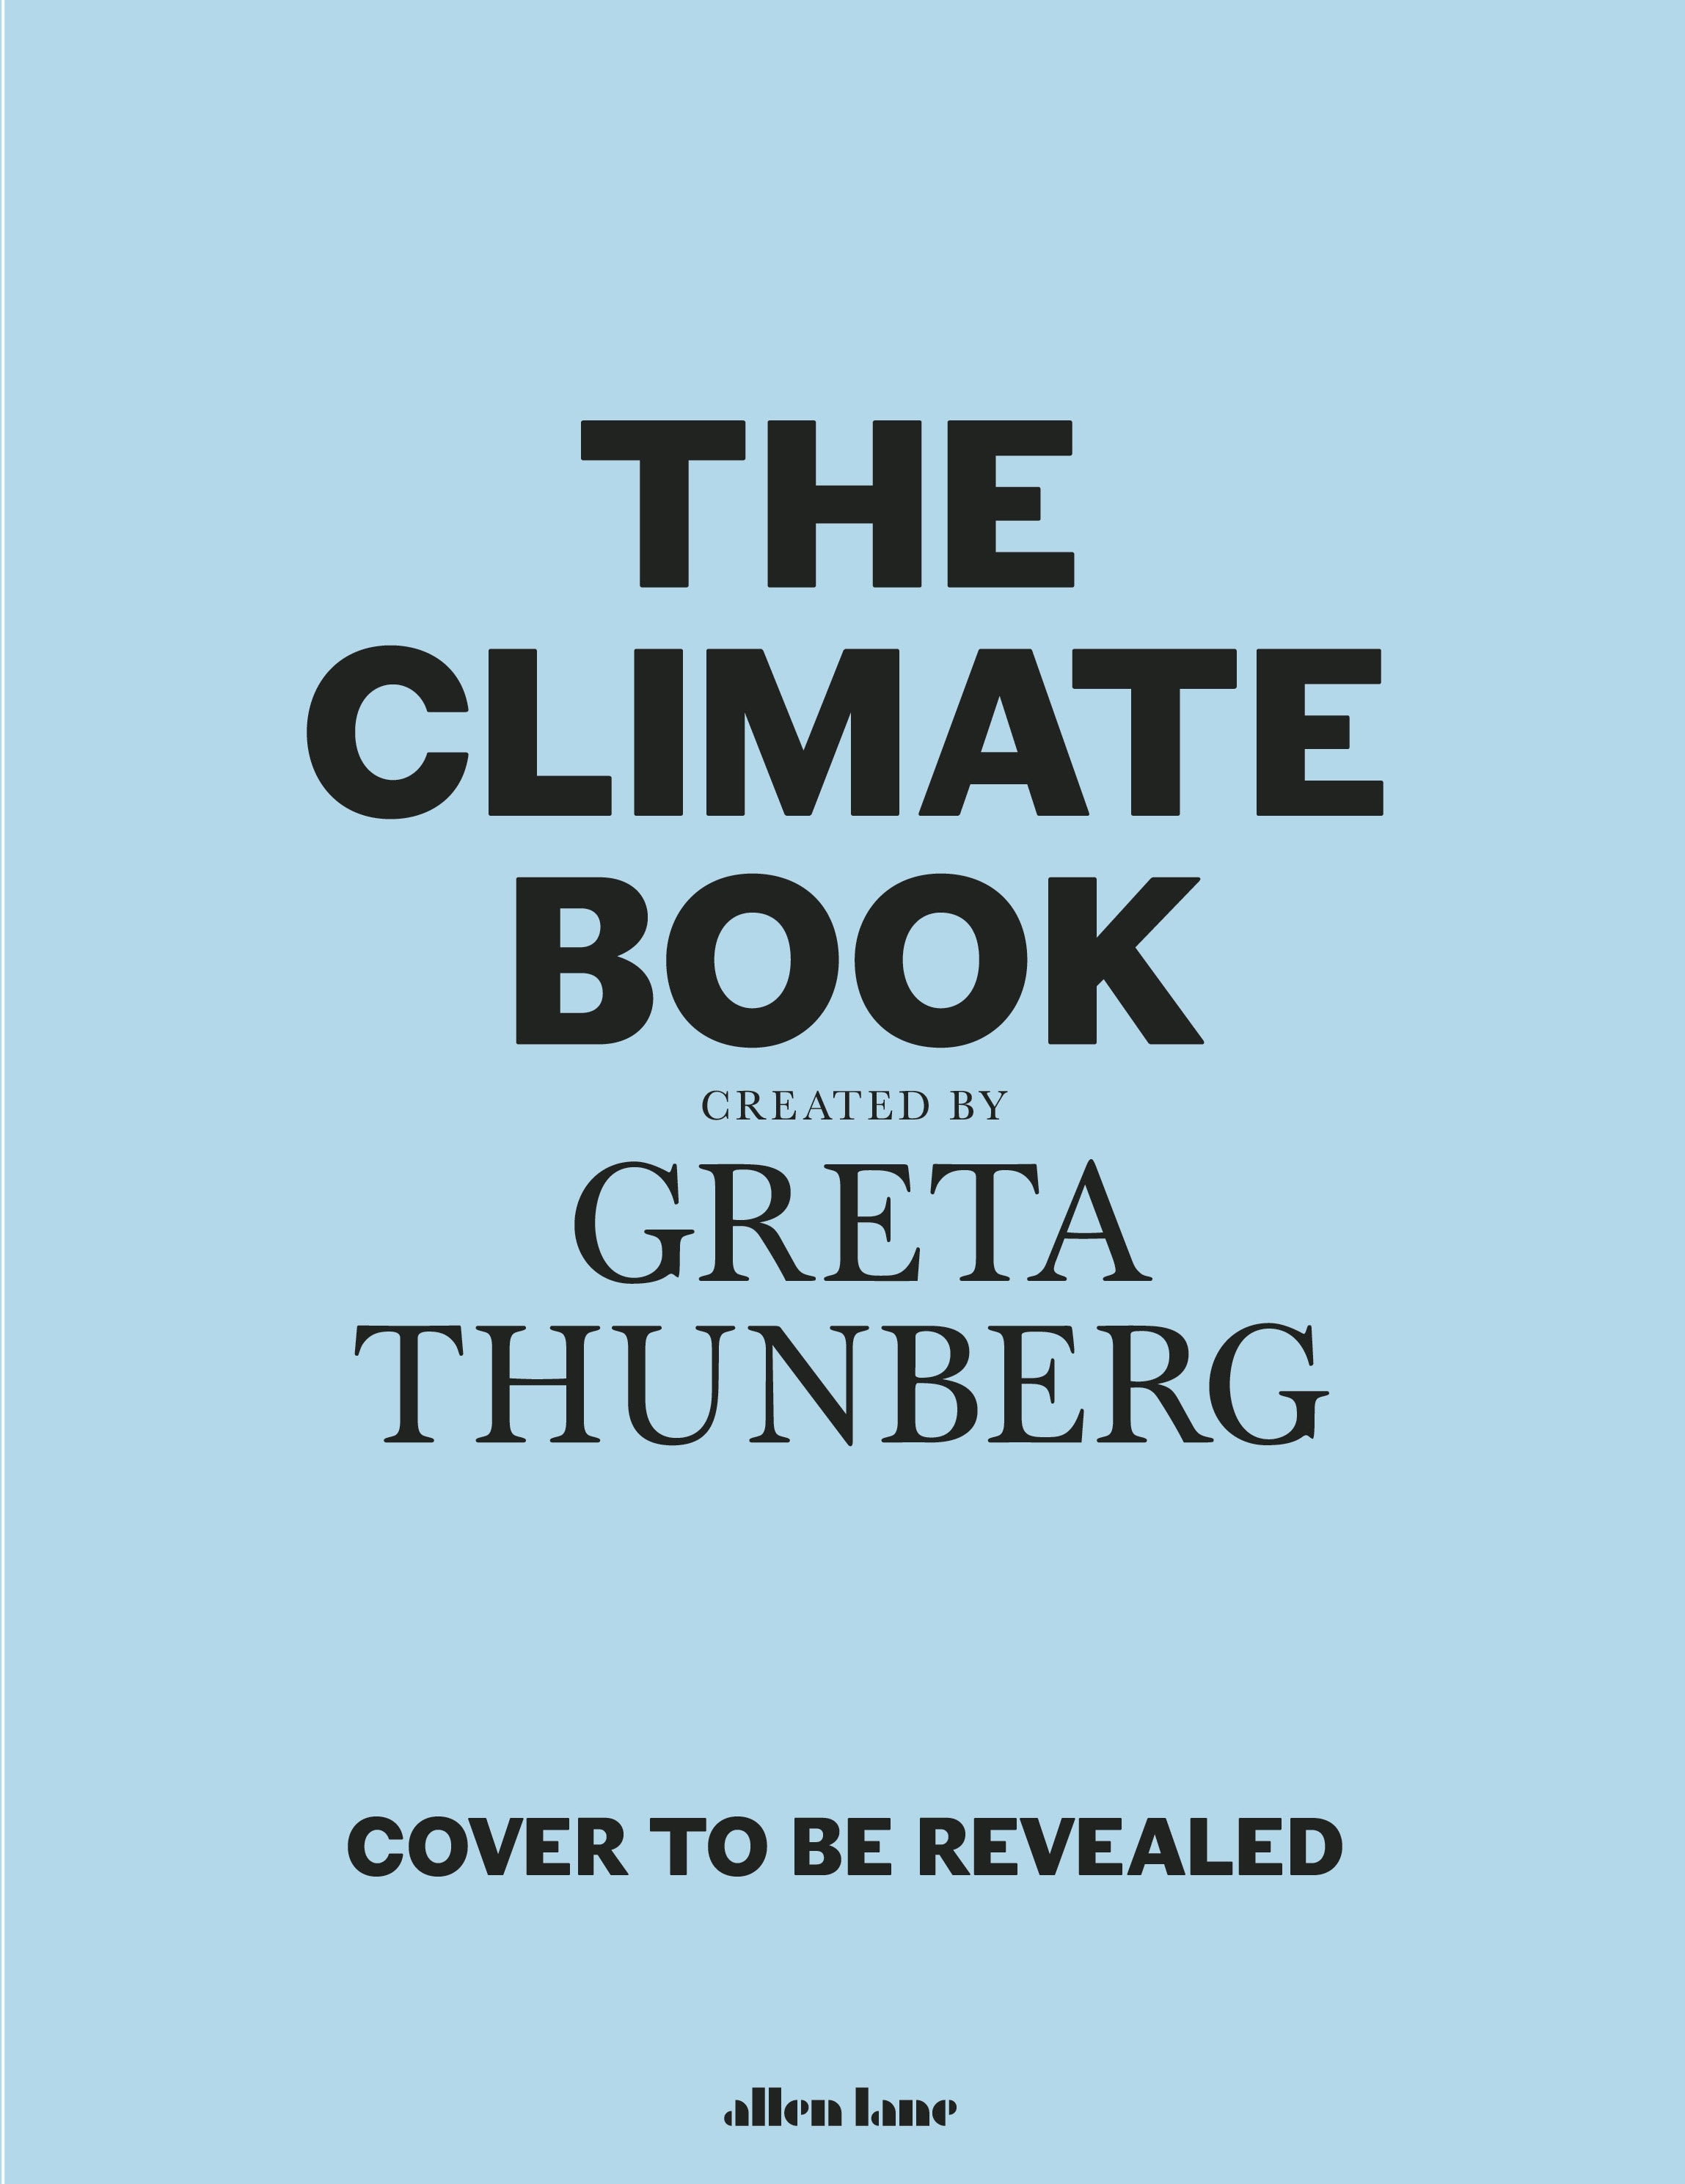 Book “The Climate Book” by Greta Thunberg — October 27, 2022